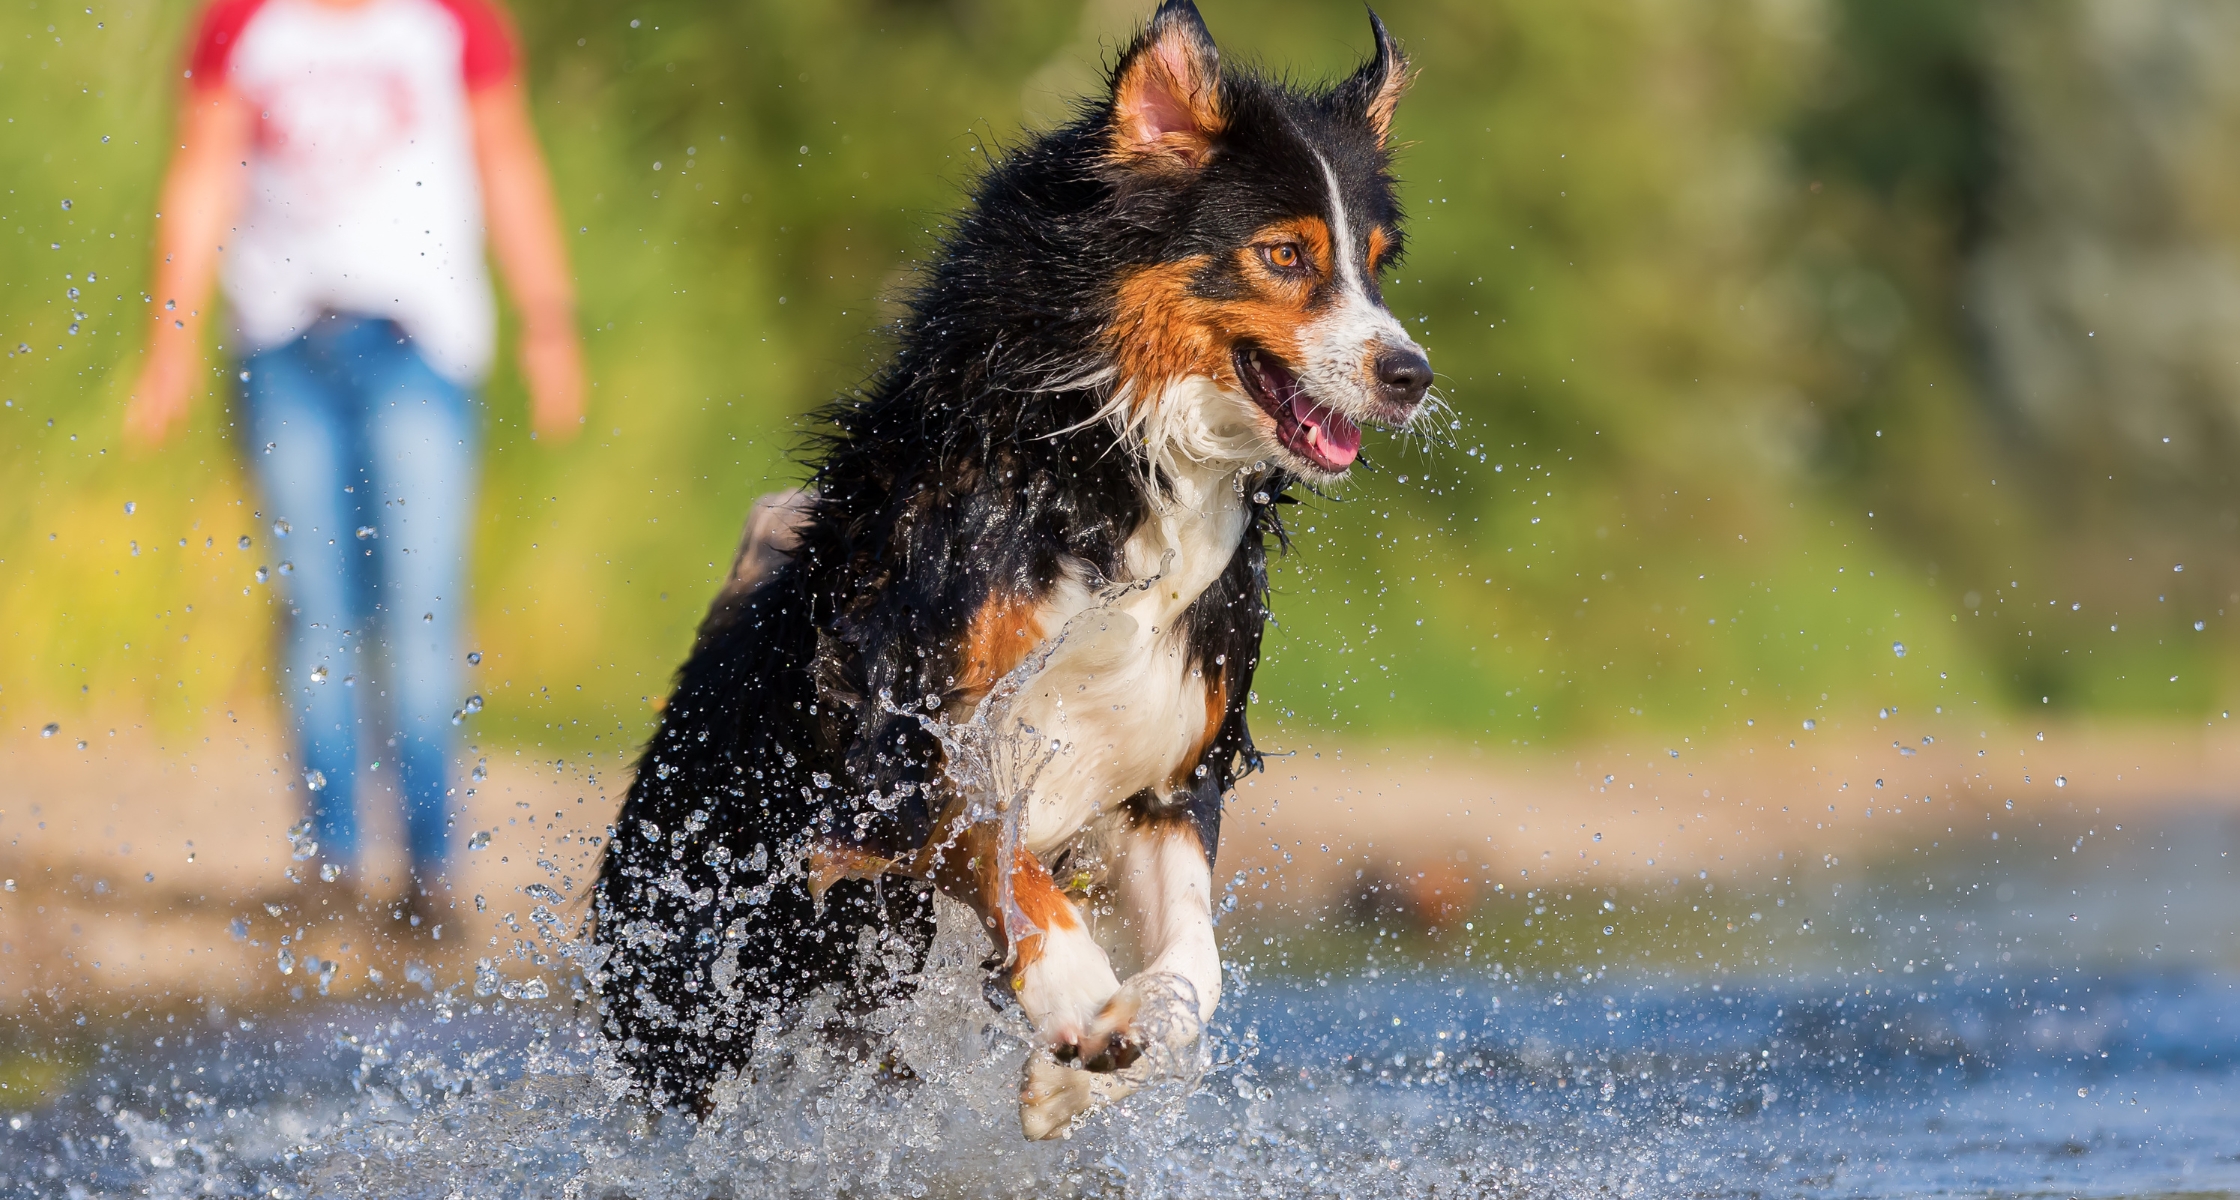 Dive into Safety: Water Safety Tips for Your Canine Companion